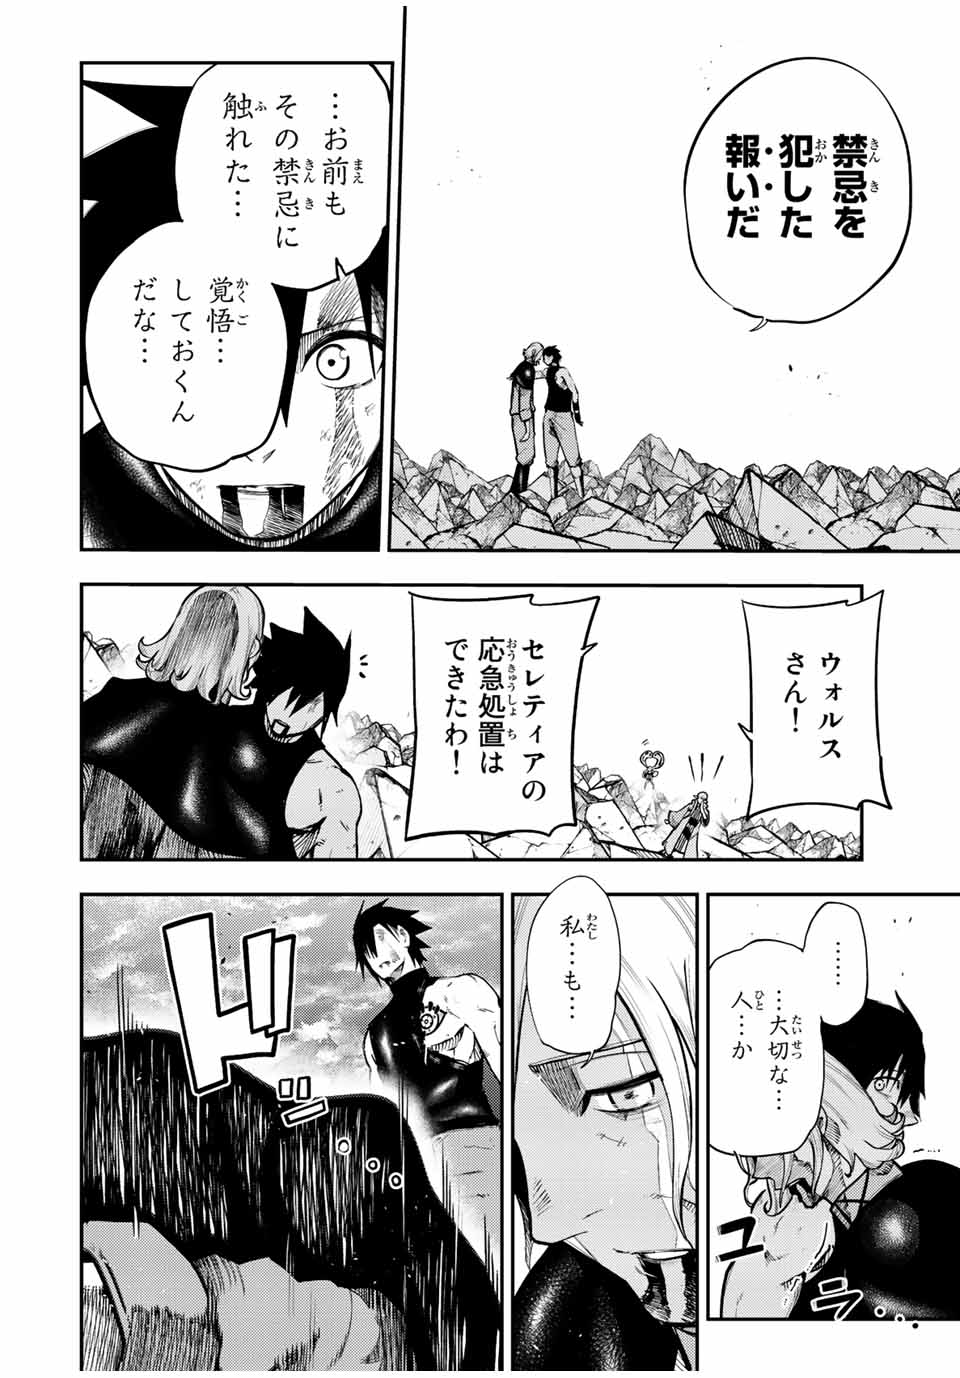 the strongest former prince-; 奴隷転生 ～その奴隷、最強の元王子につき～ 第114話 - Page 18